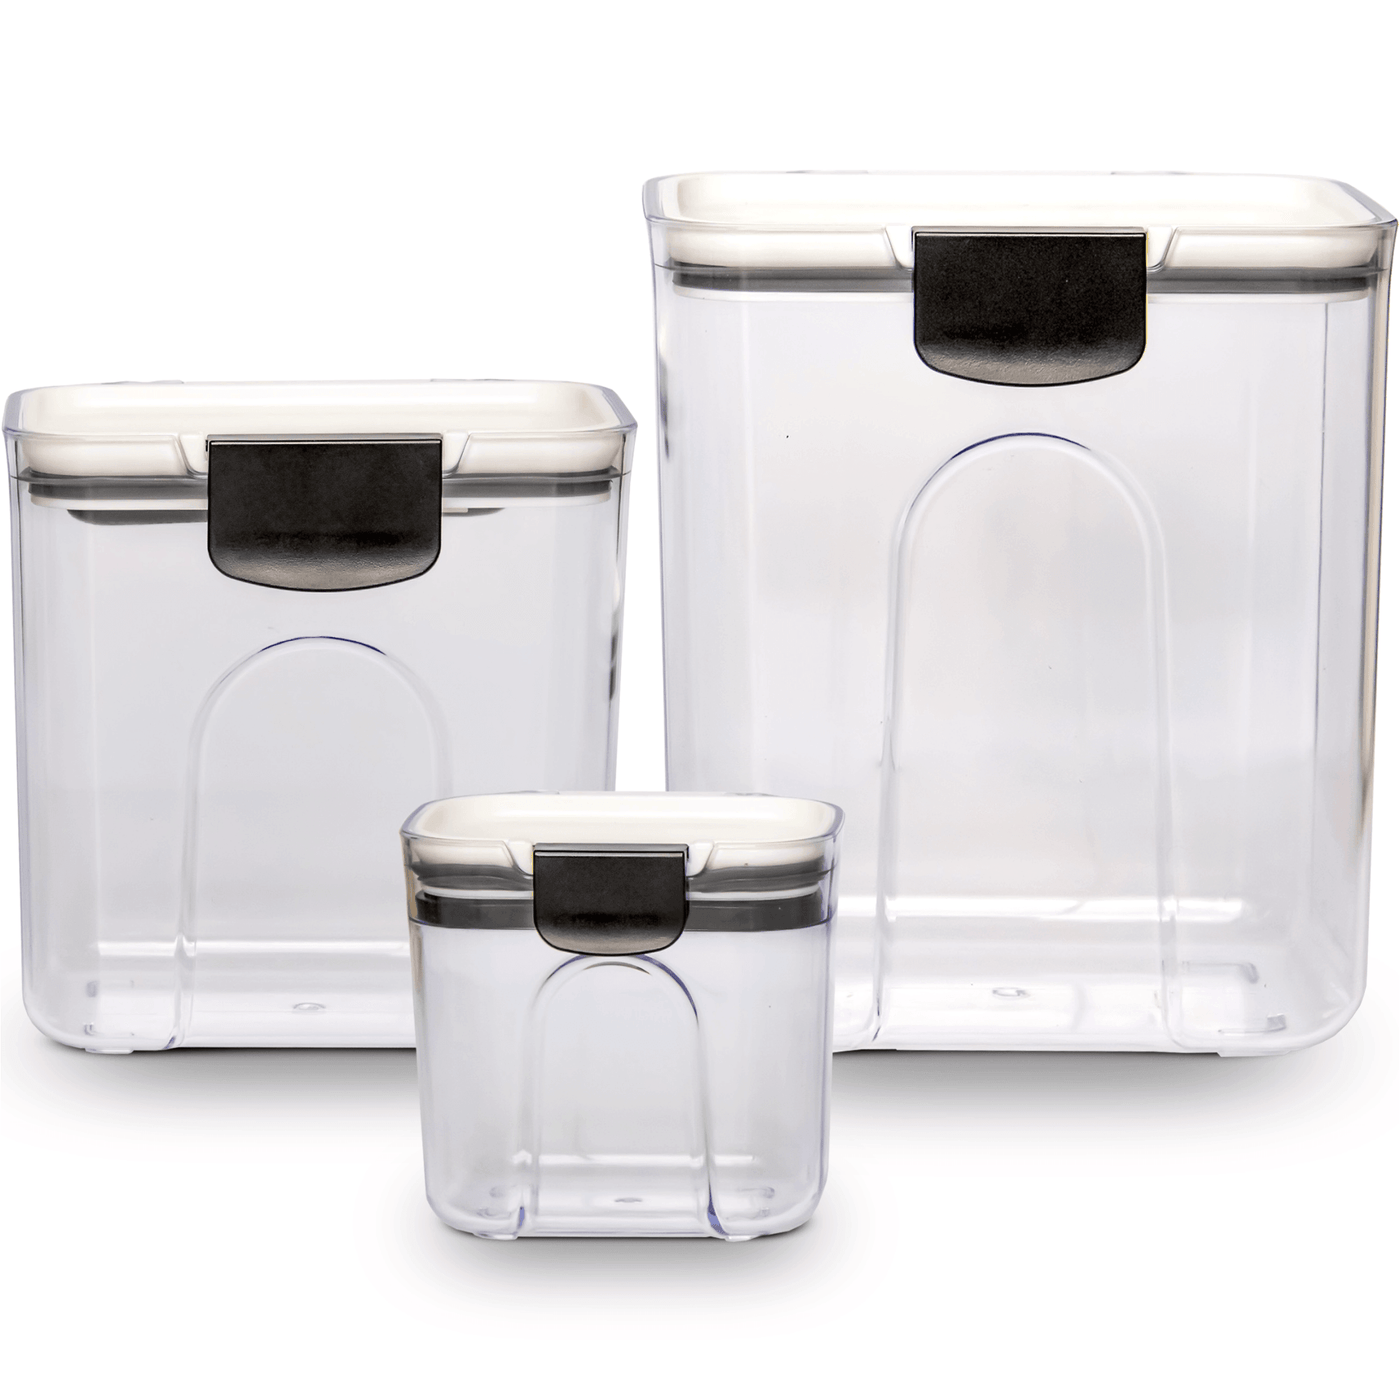  Cheer Collection Stackable Airtight Food Storage